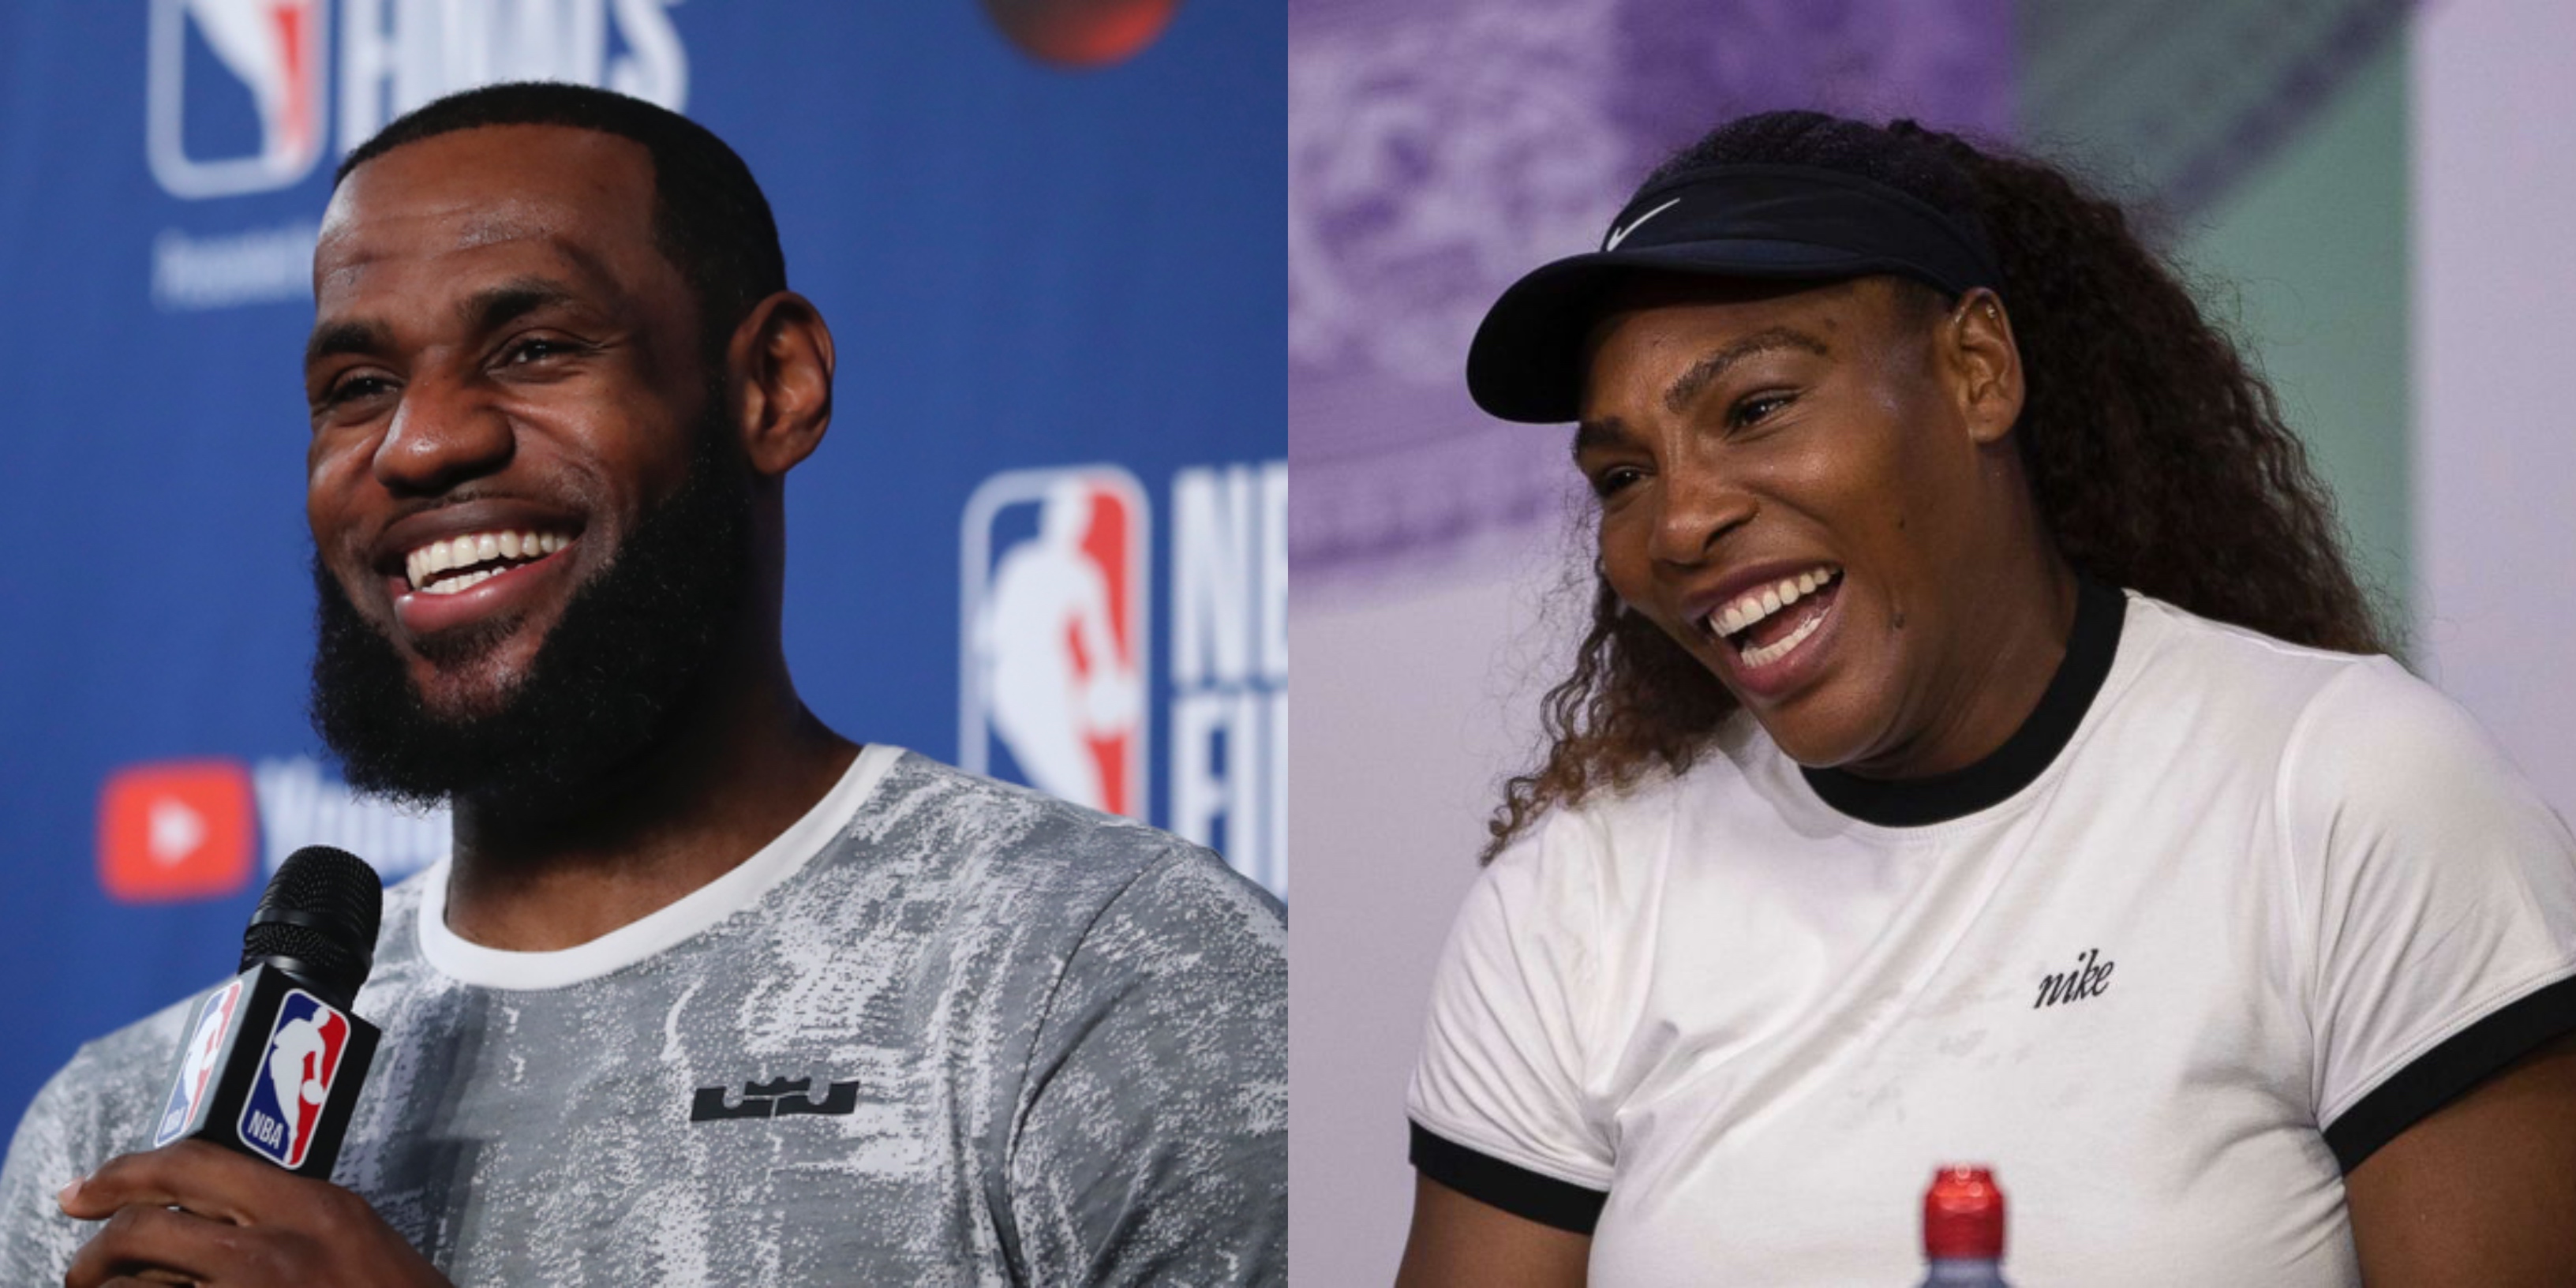 LeBron James, Serena Williams Share Their Support for Nike's 'Just Do It' Ad Campaign